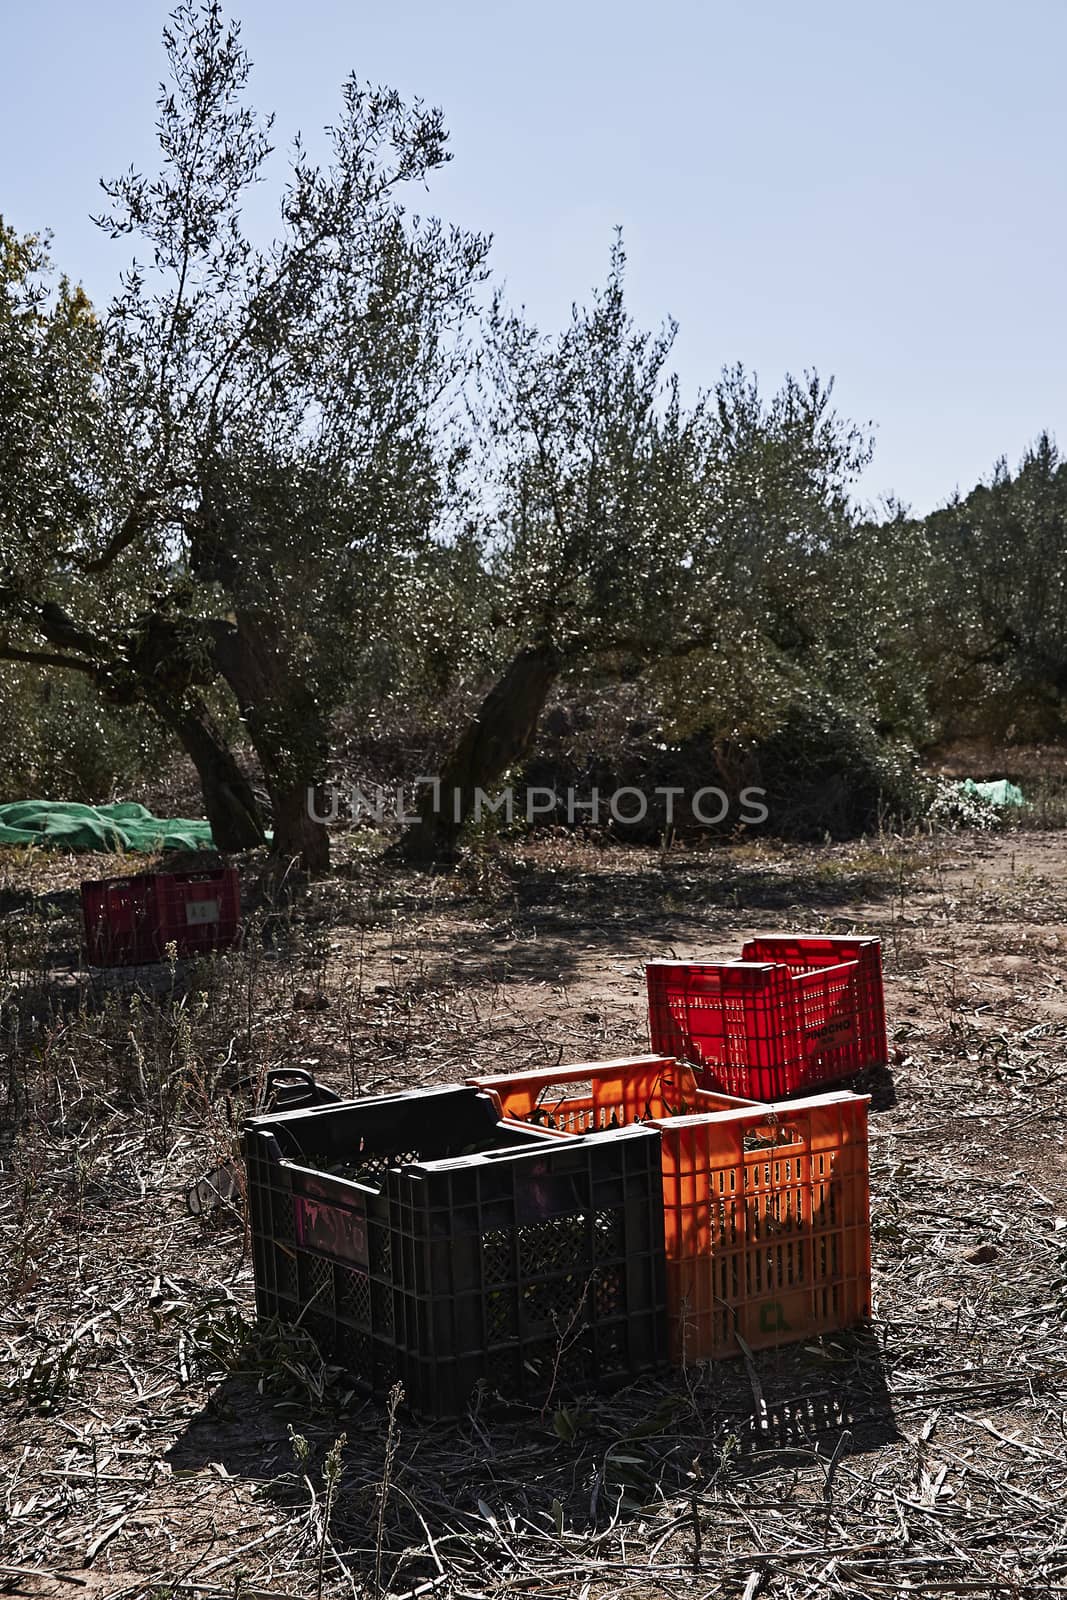 Olive fields prepared for the harvest, olives, sunny day, traditional agriculture, crates, handsaw